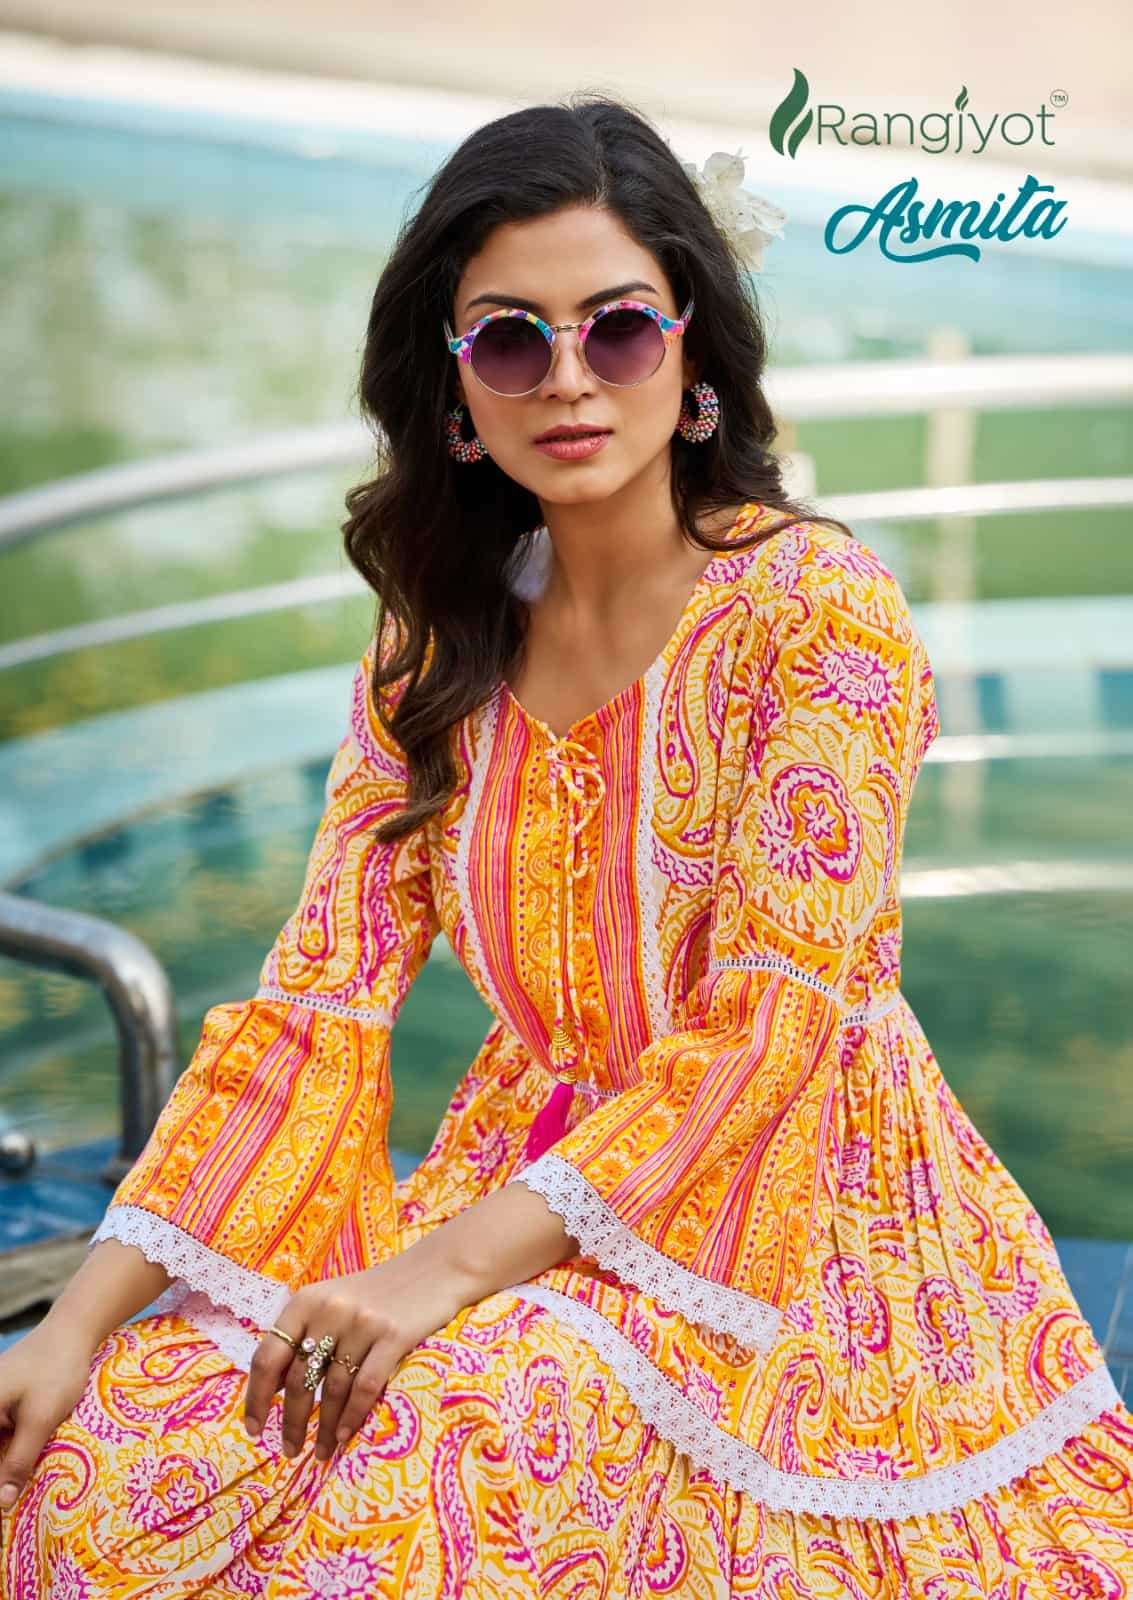 Riya Designer Conch Party Wear Short Kurti Collection In Wholesale ( 6 Pcs  Catalog ) Lowest Price Online Wholesaler And Supplier of Salwar Suit ,  Saree And Kurtis Wholesale Price In India | ladiesfashionhouse.com